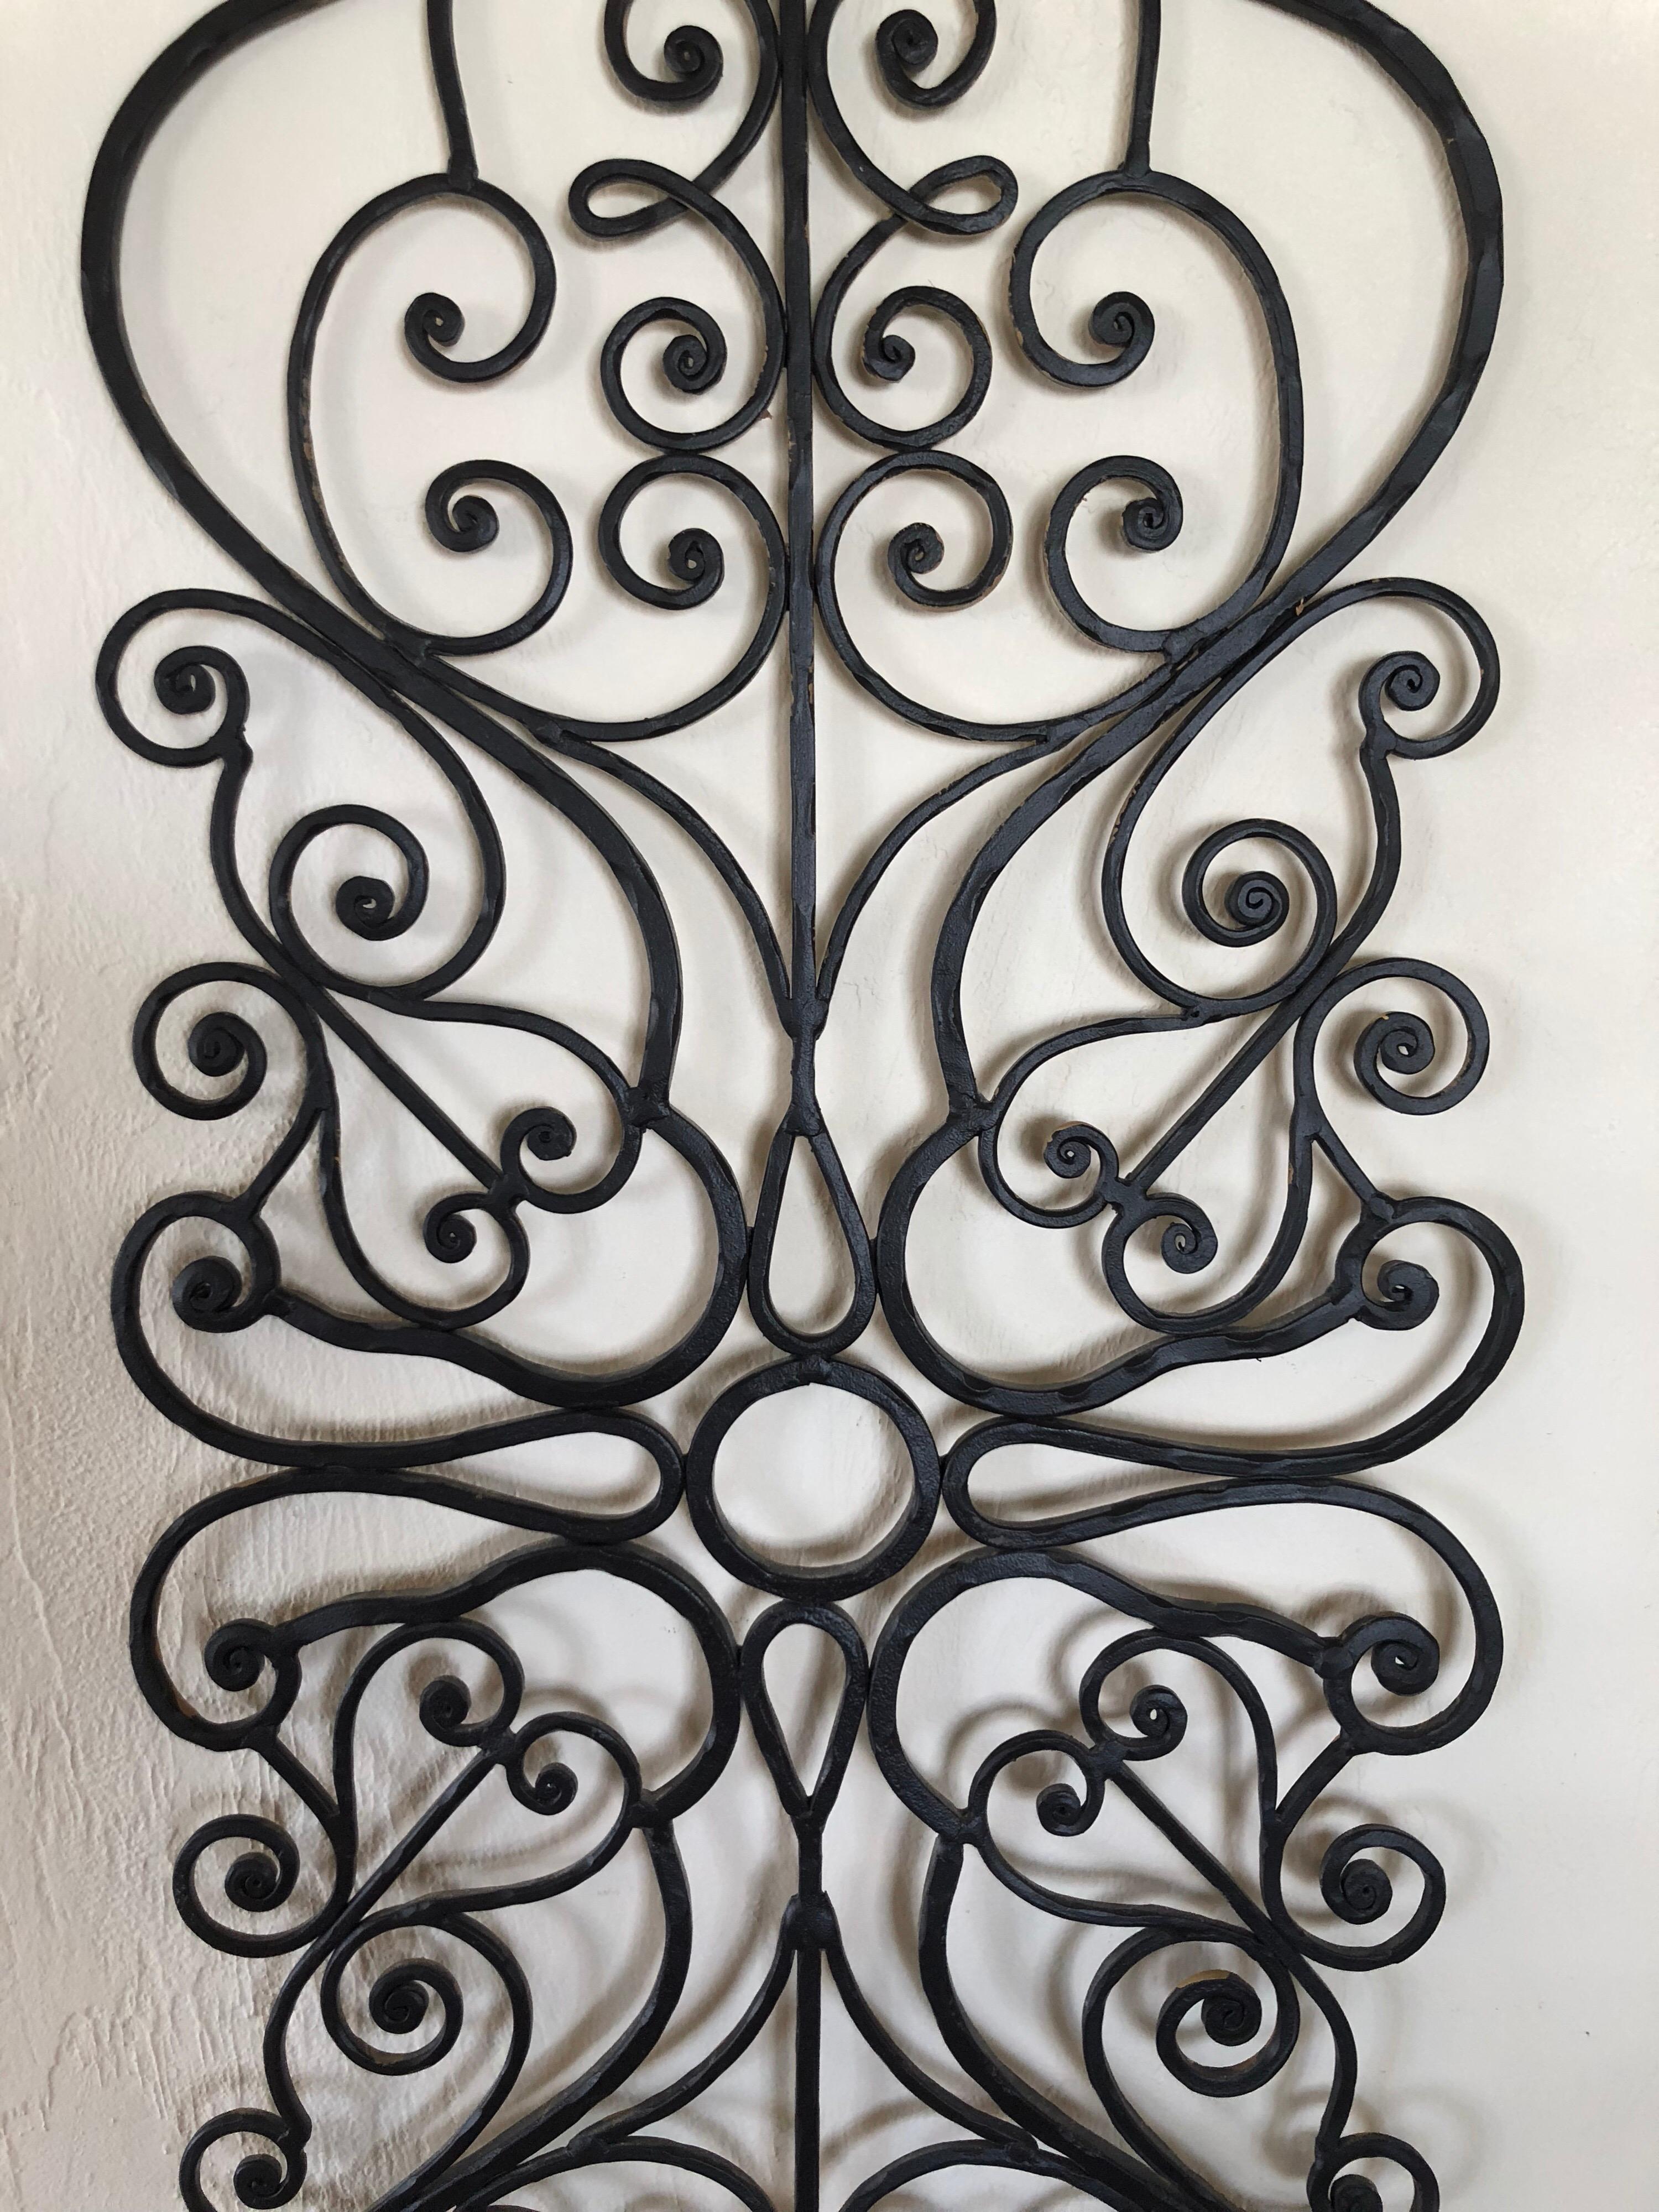 Large Hand-Wrought Iron Wall Sculpture 1